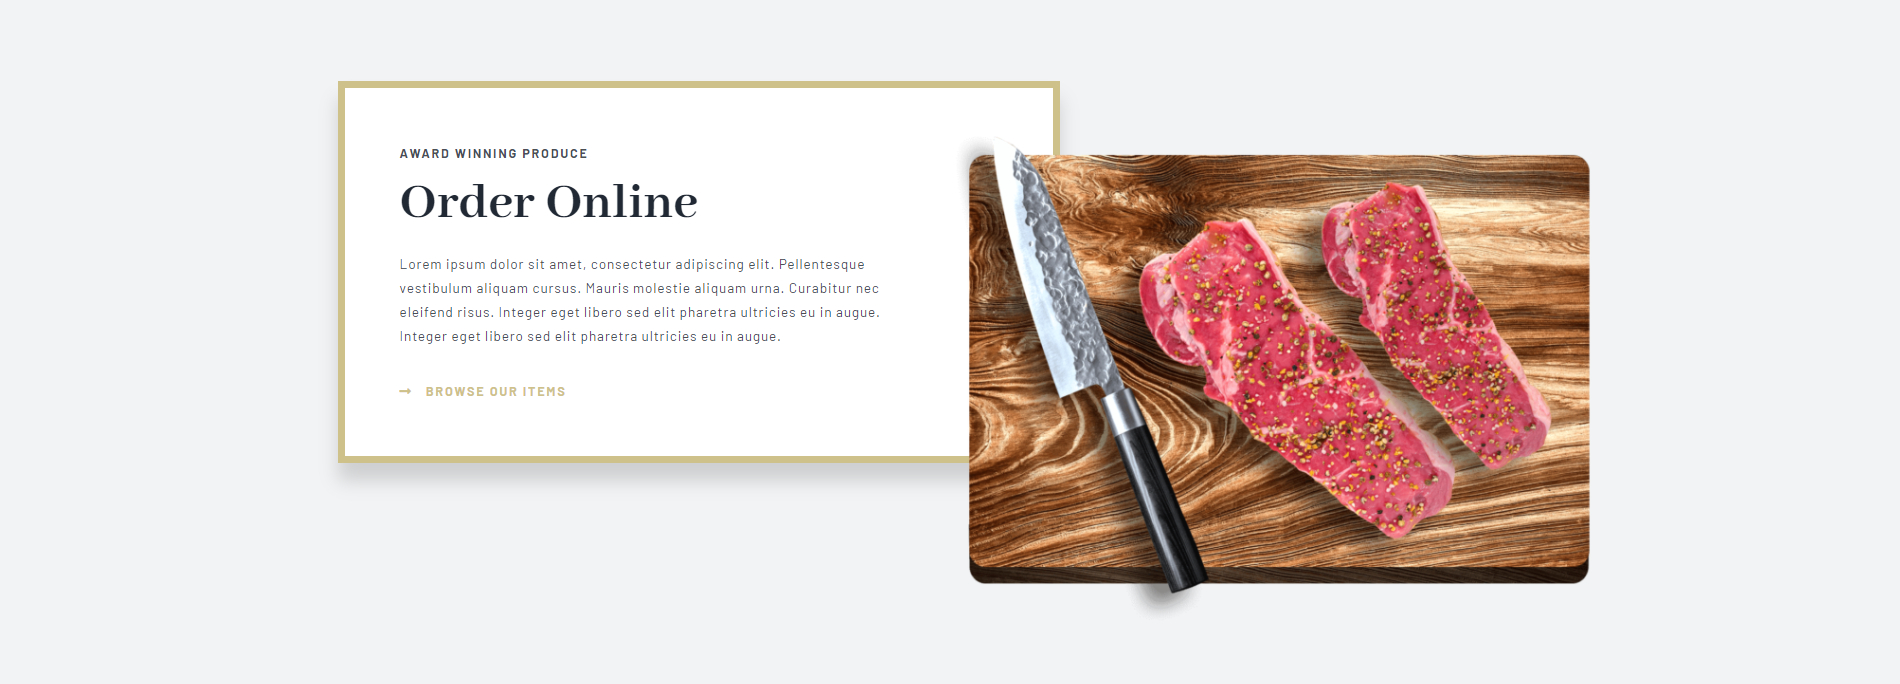 Country Butcher Order Online